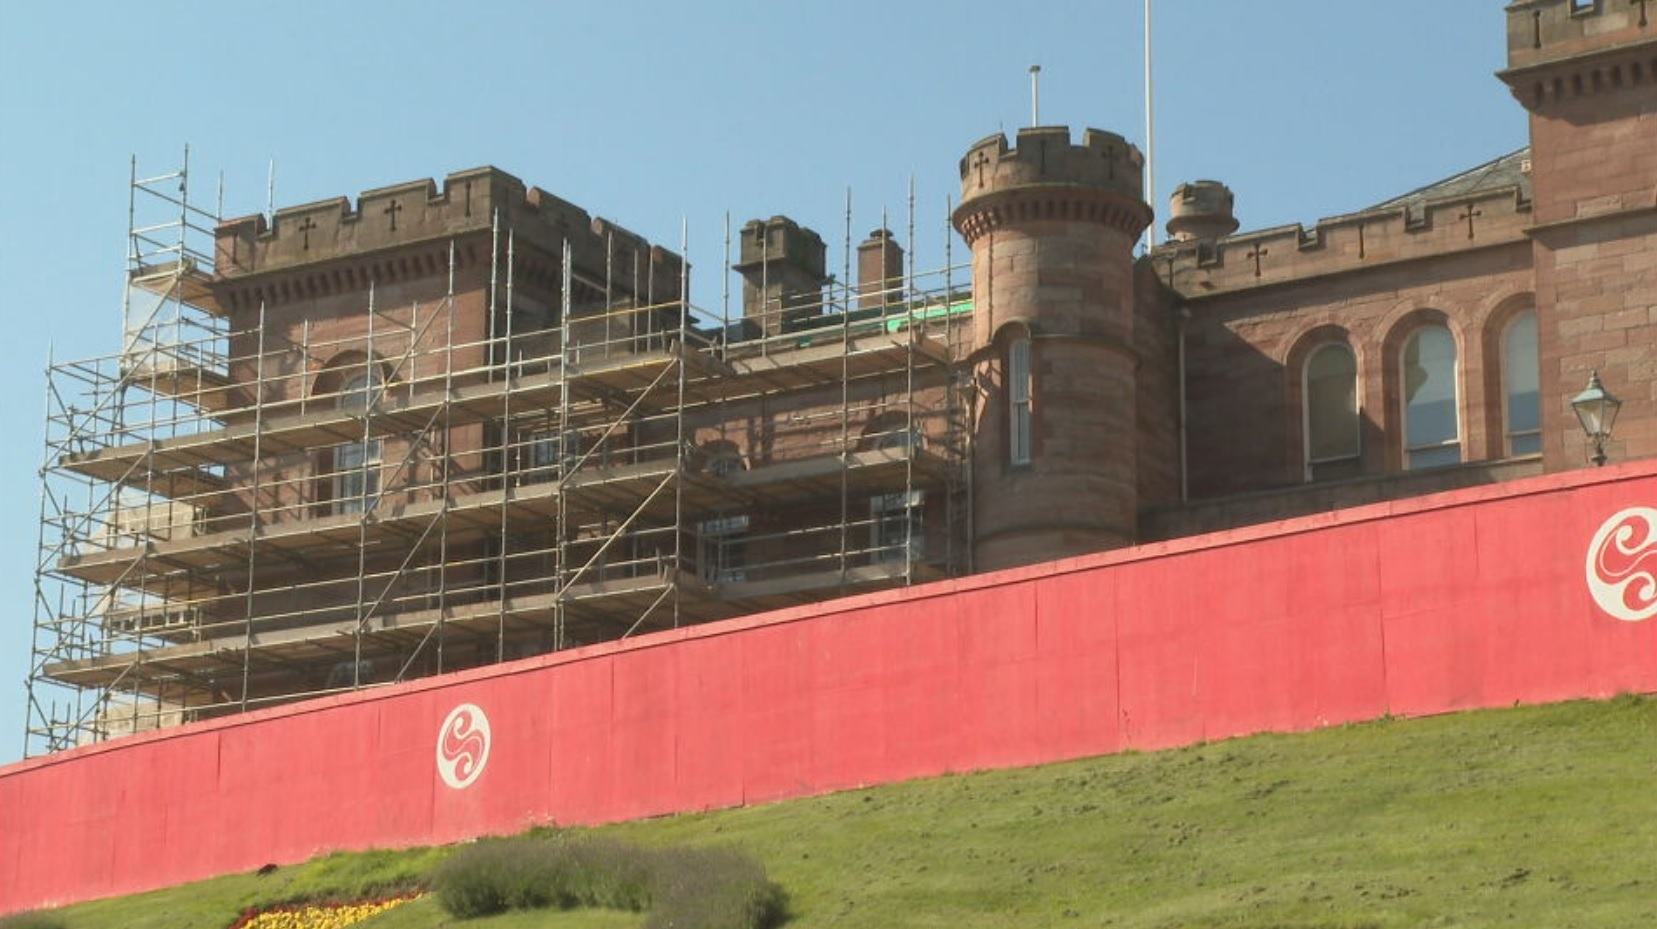 Inverness Castle is to reopen in 2025